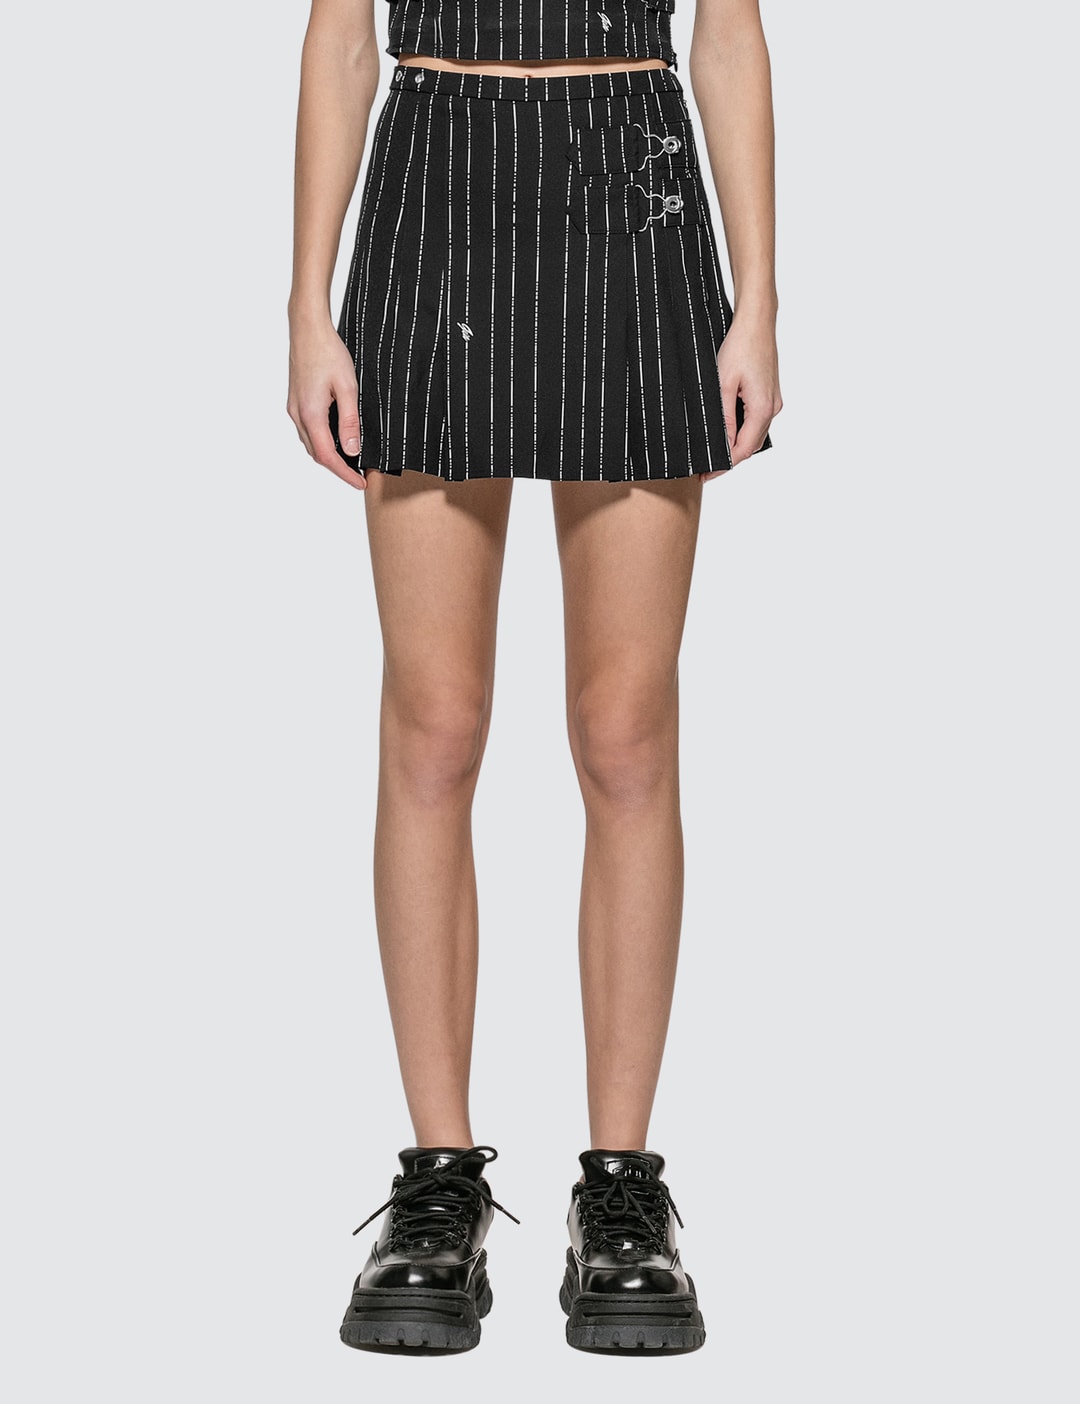 I.AM.GIA - Heather Skirt | HBX - Globally Curated Fashion and Lifestyle ...